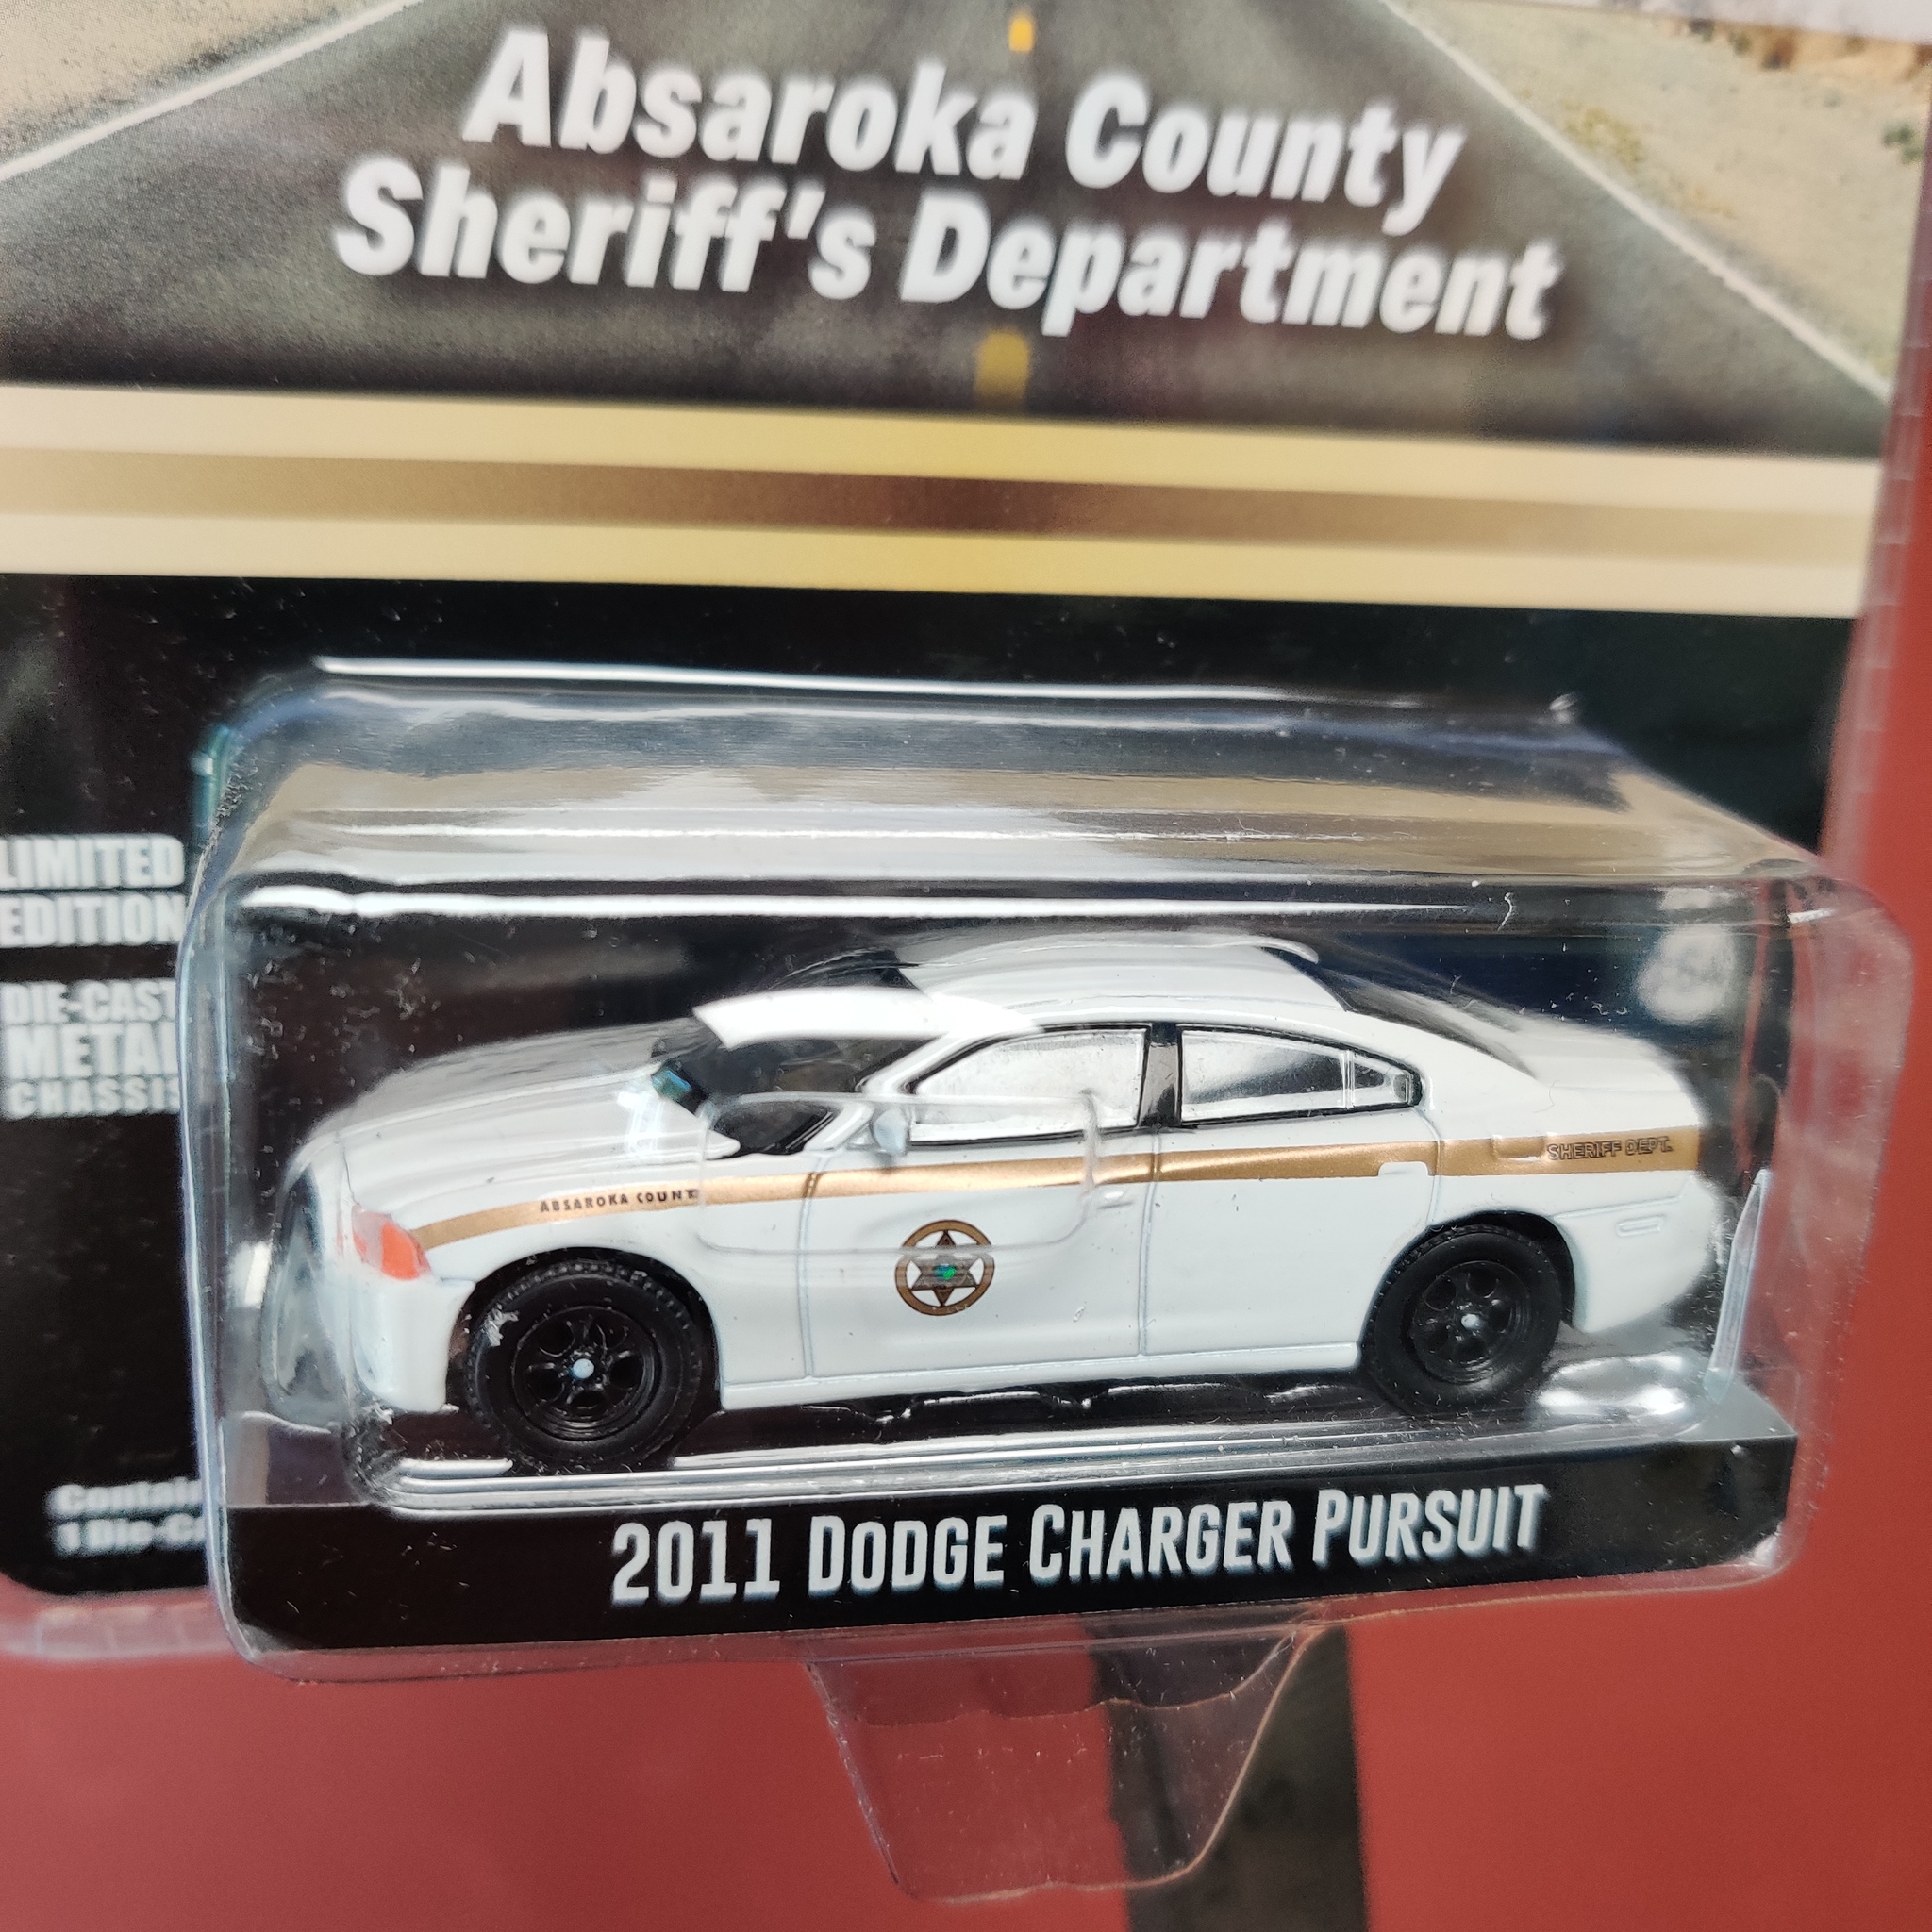 Skala 1/64 Dodge Charger Pursuit 11' "Absaroka County Sheriff's Dep" fr Greenlight Excl.